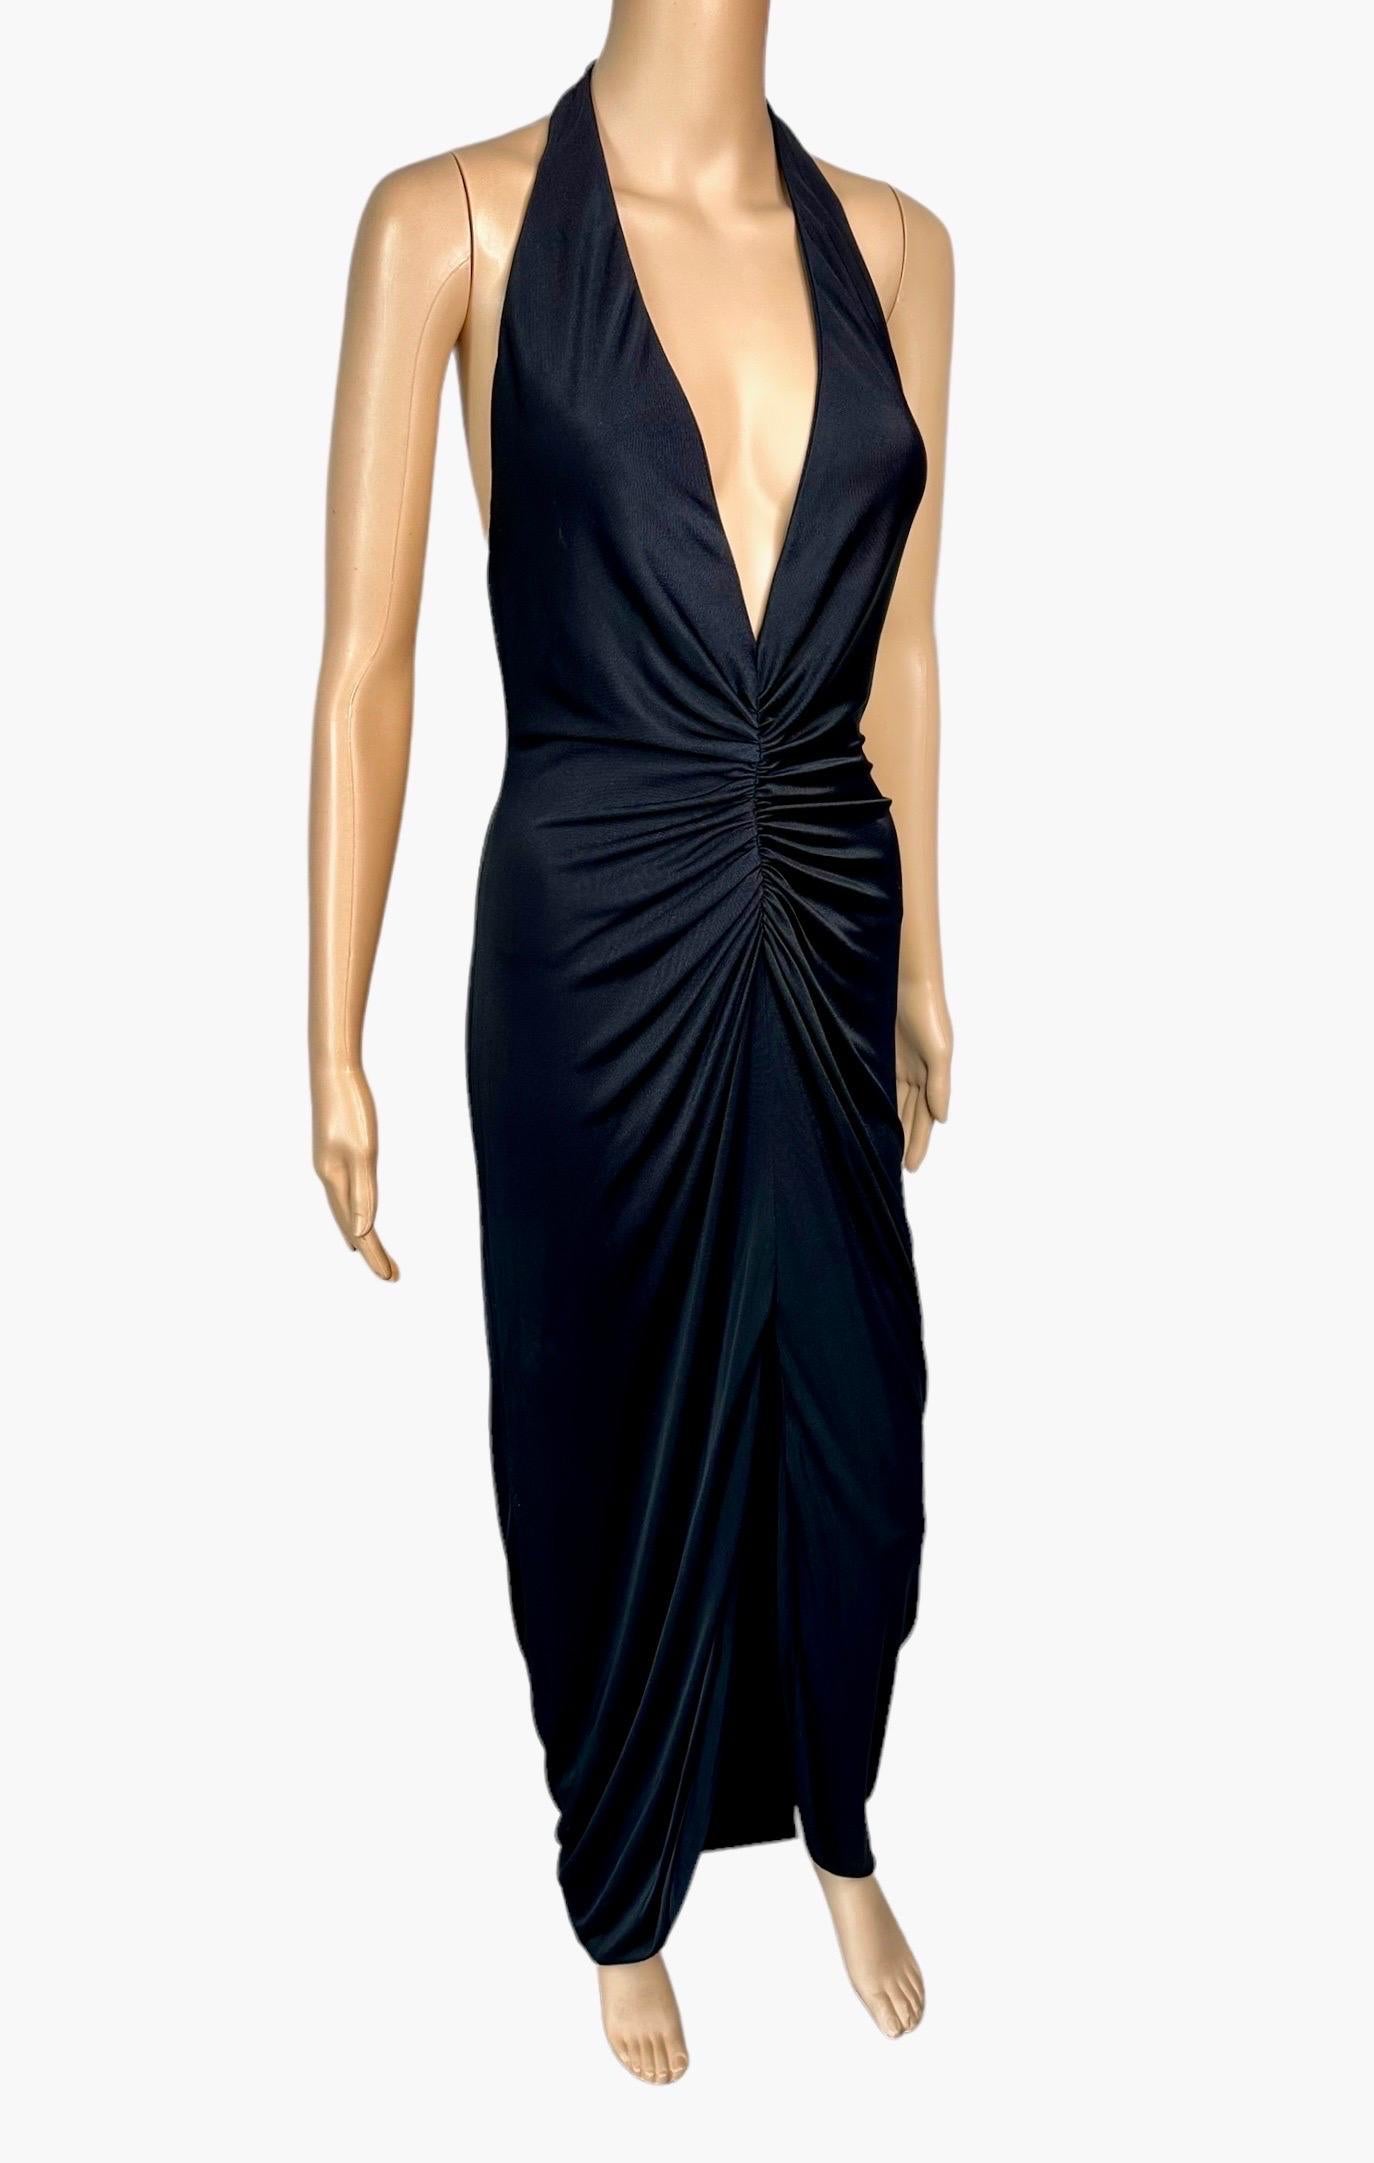 Versace S/S 2005 Runway Plunging Hi-Low Ruched Open Back Evening Dress Gown For Sale 1